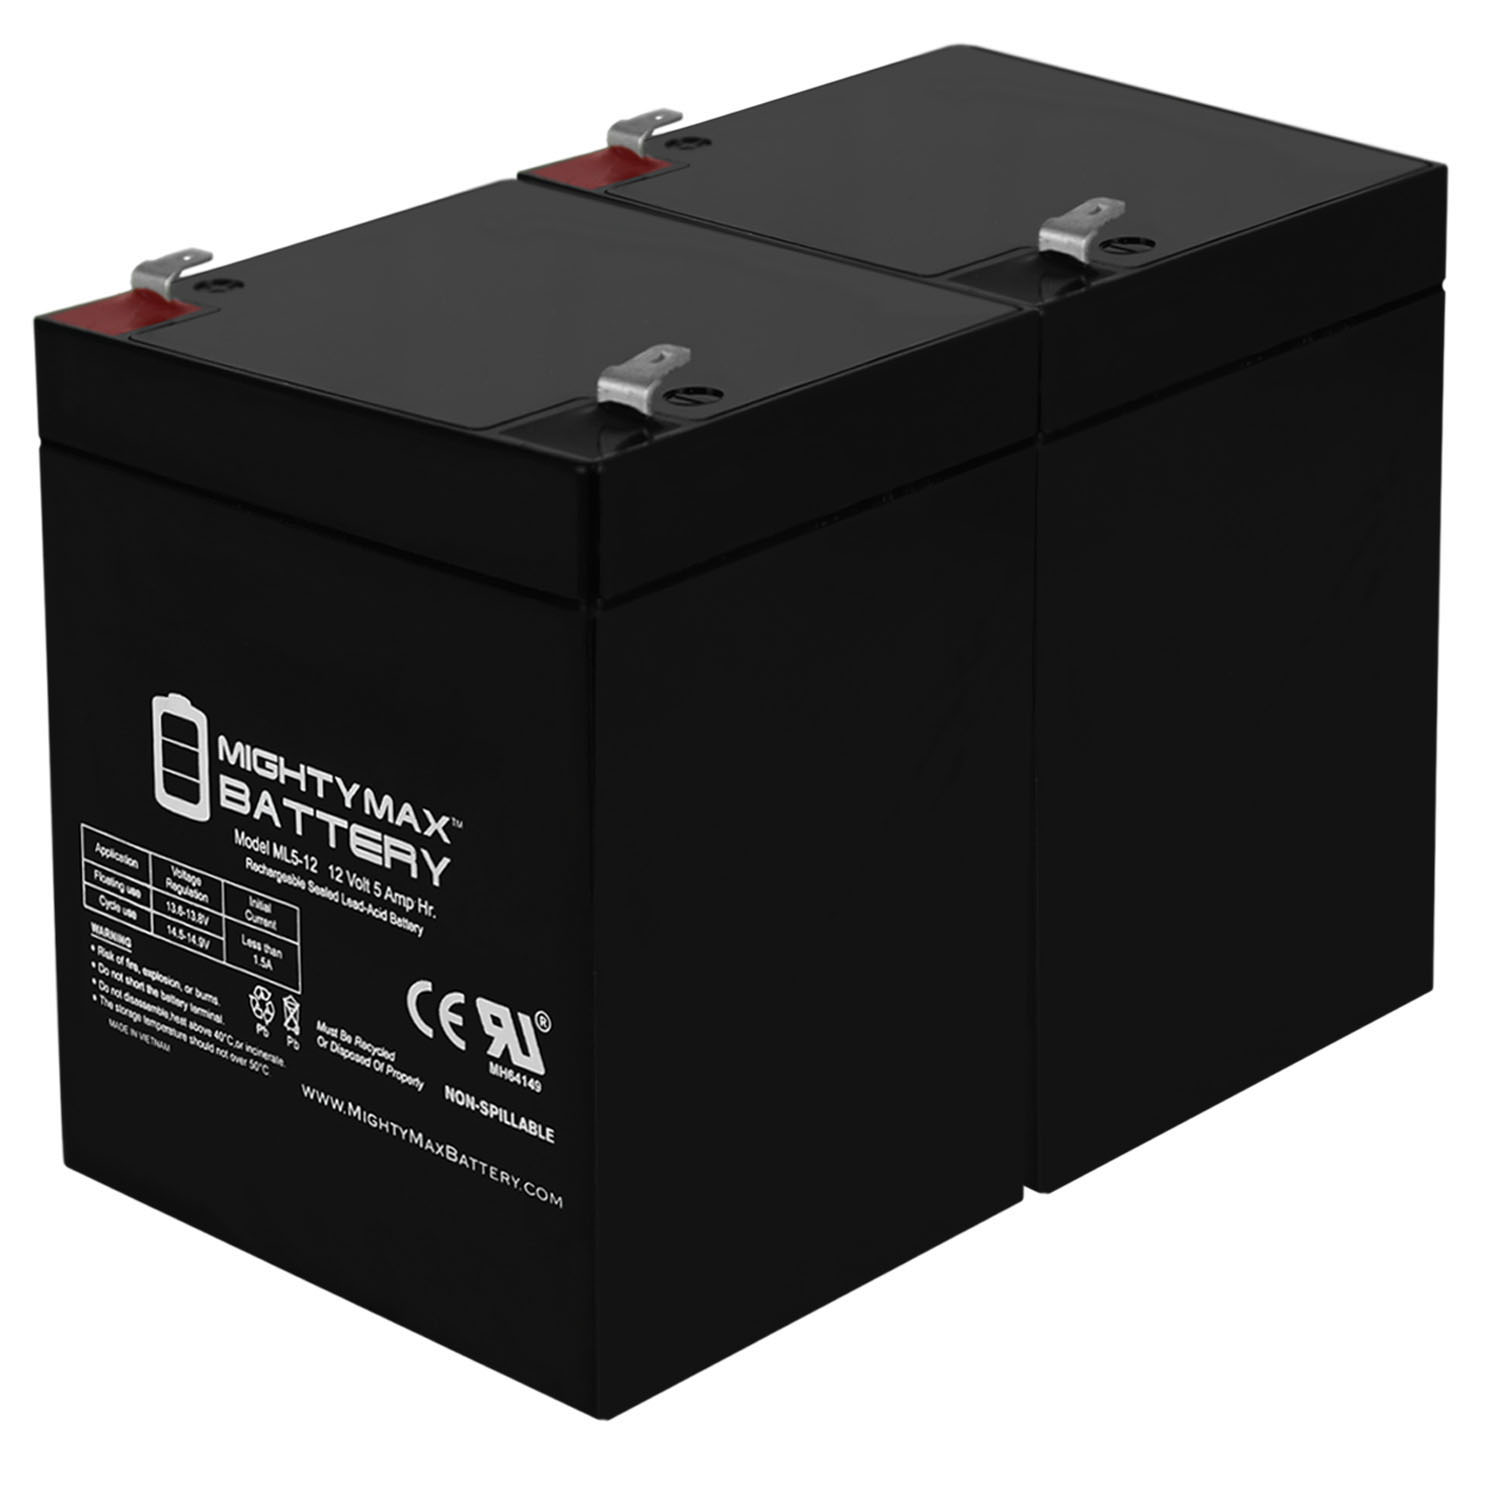 12V 5AH Currie eZip 130 Electric Scooter Battery - 2 Pack